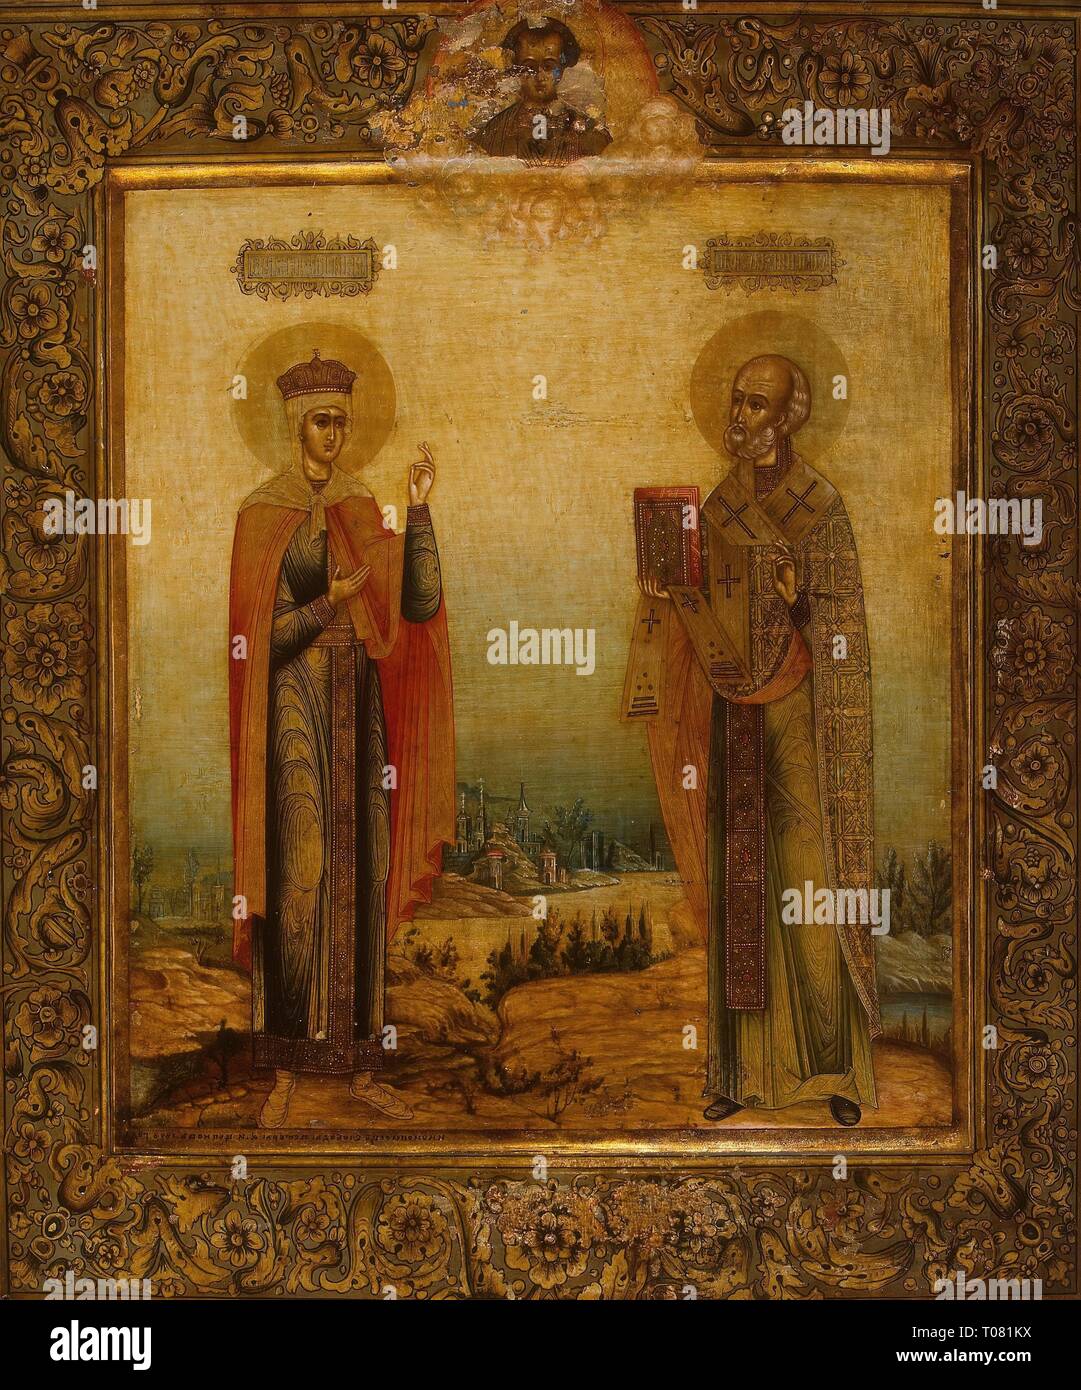 'St Nicholas the Miracle-Worker and St Tsarina Alexandra'. Russia, 1898. Dimensions: 31,3x26,8 cm. Museum: State Hermitage, St. Petersburg. Author: A. Tsepkov . A. I. Tsepkov. Stock Photo